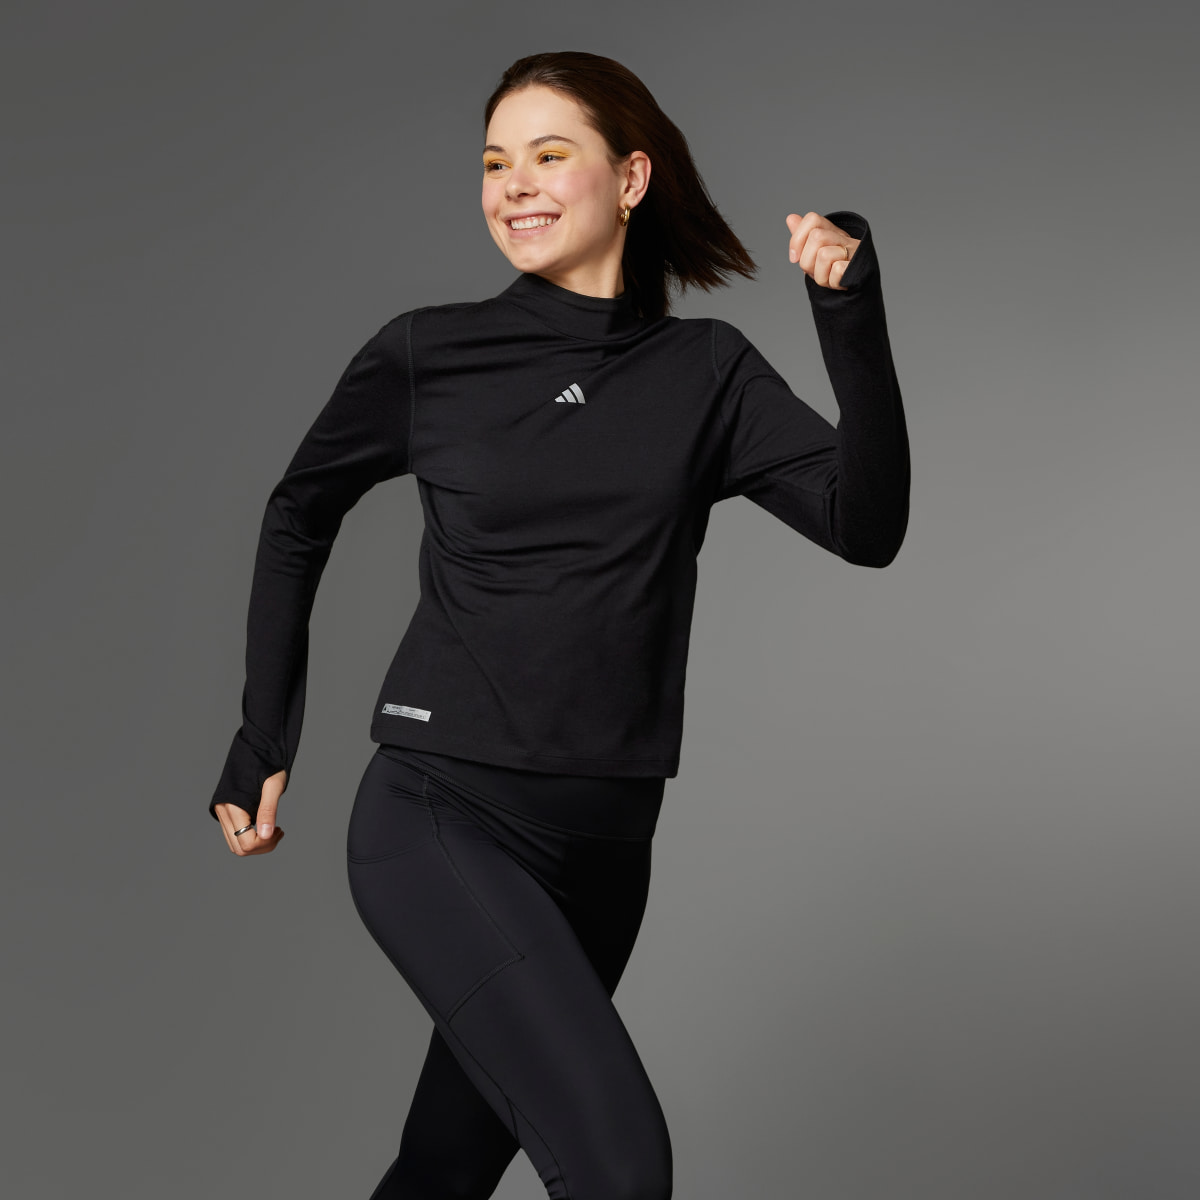 Adidas Ultimate Running Conquer the Elements Merino Long Sleeve Long-sleeve Top. 10